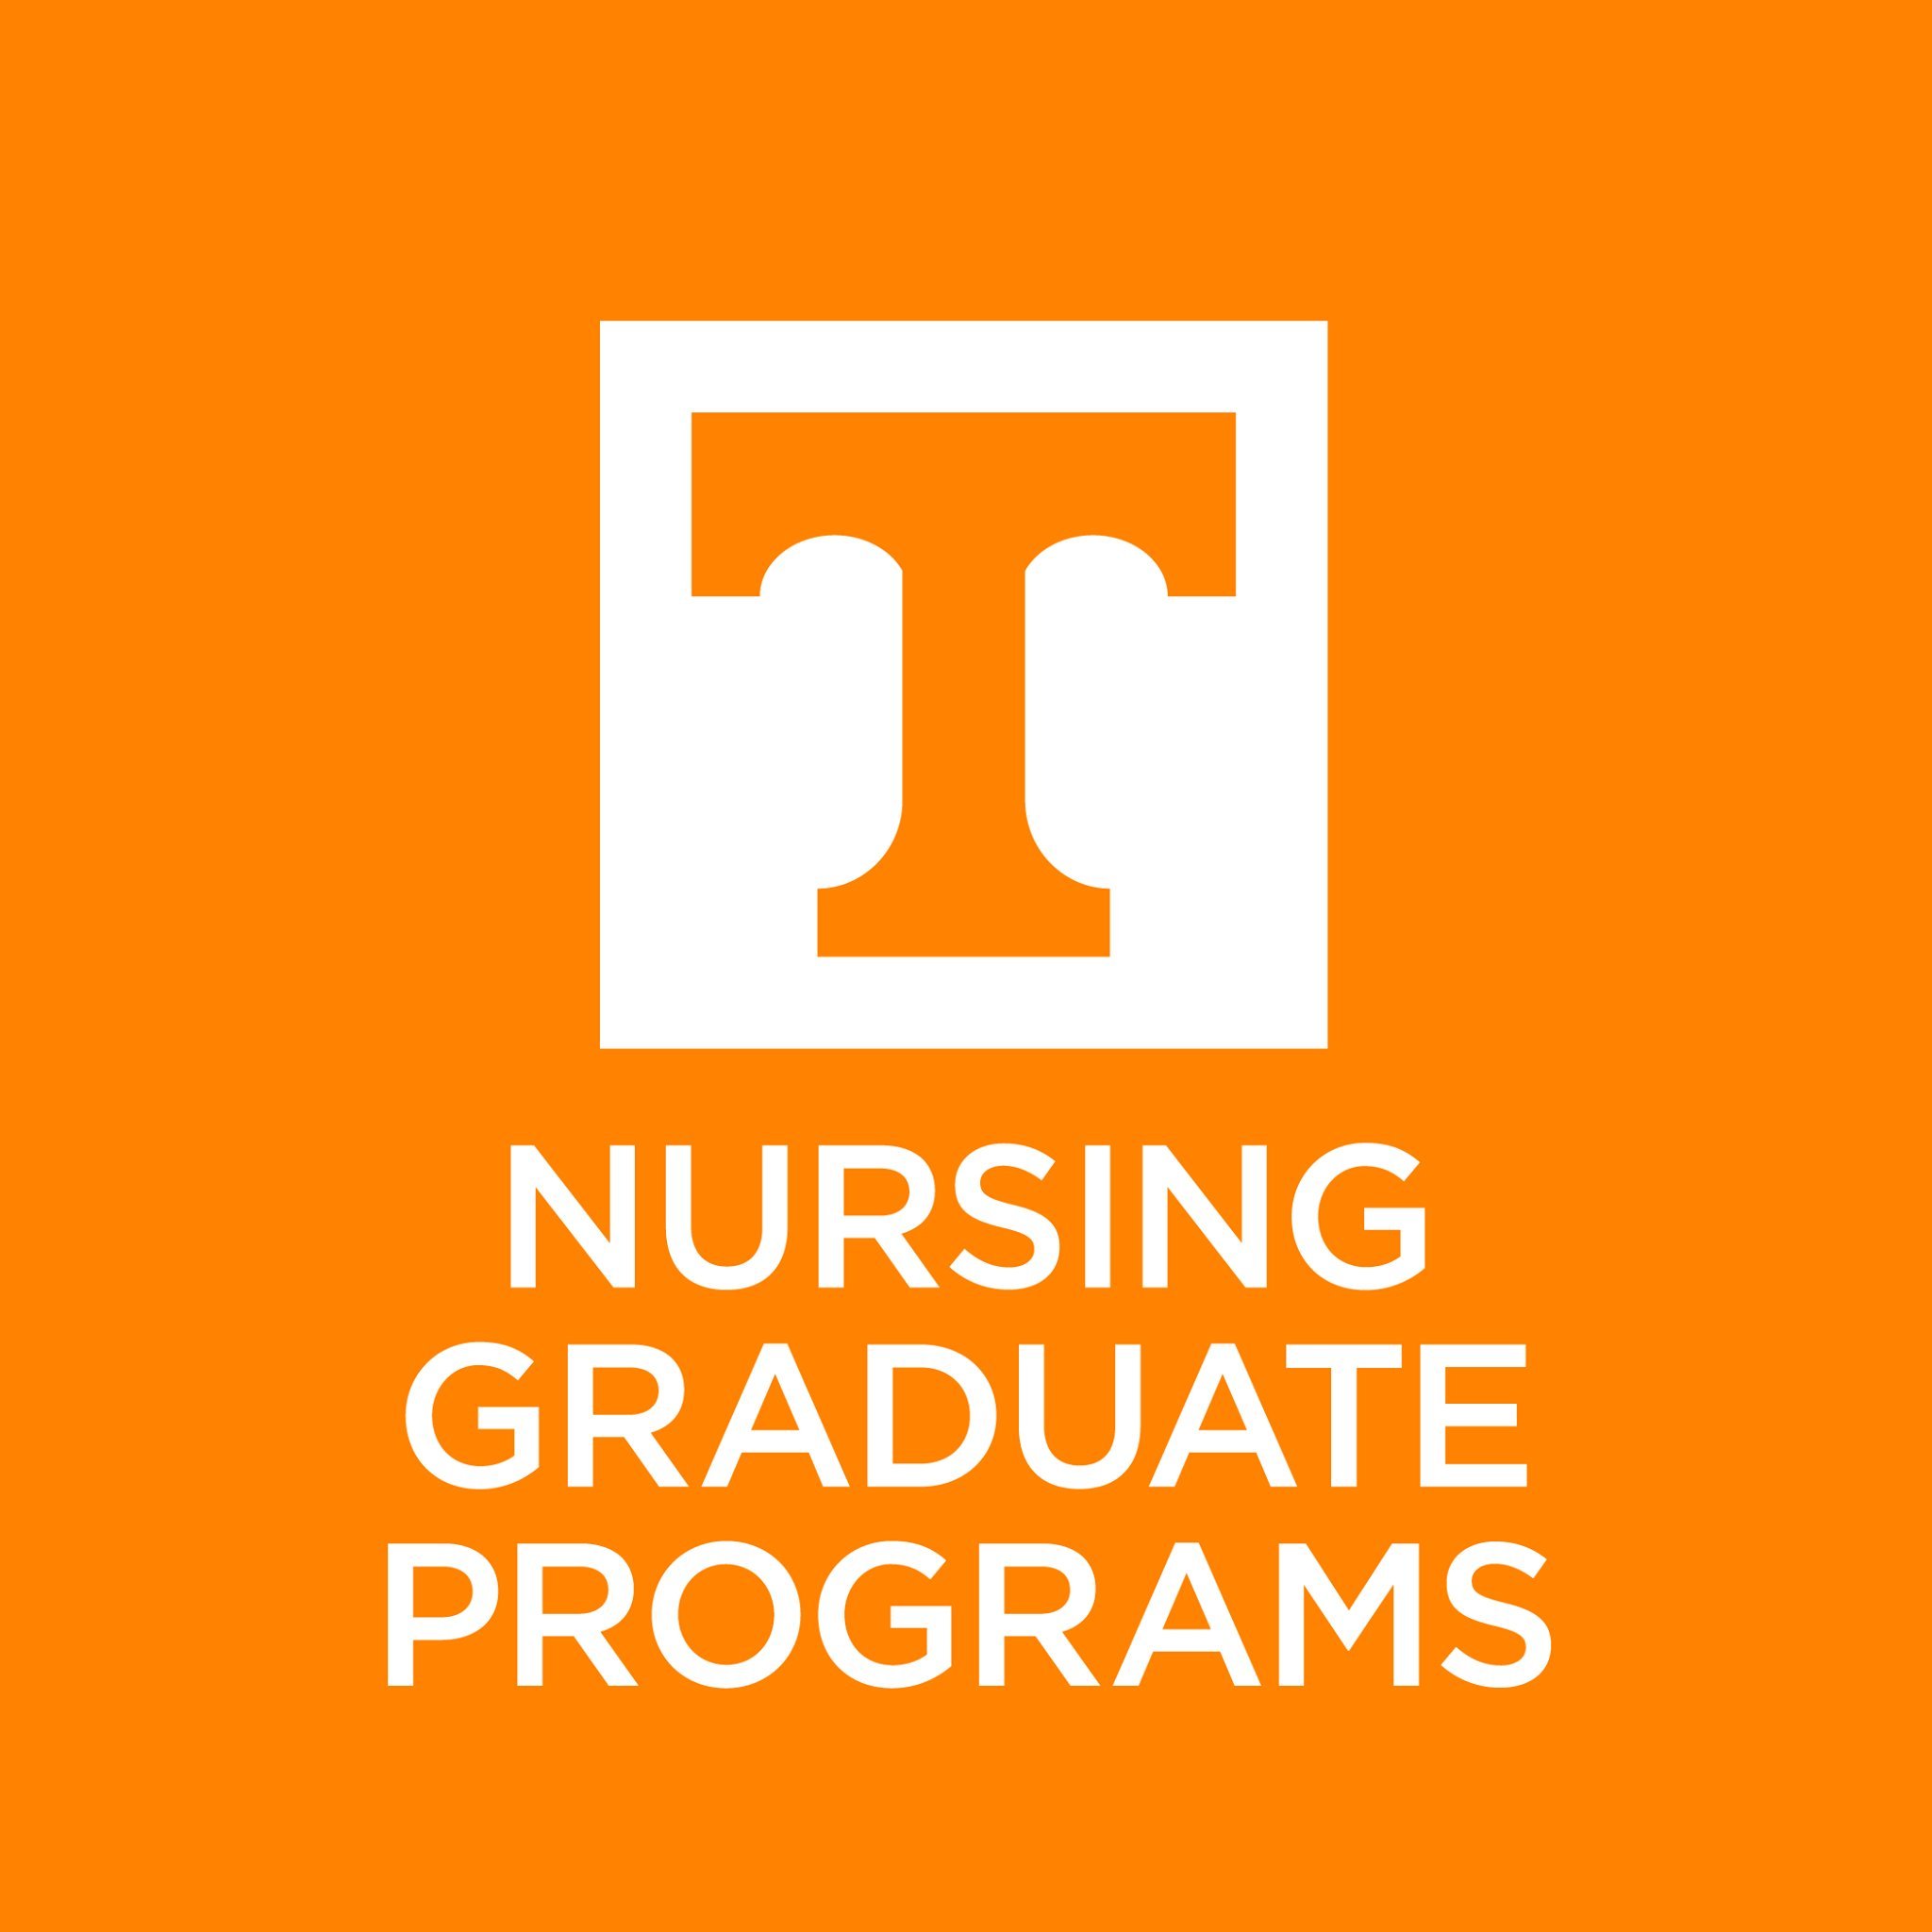 The University of Tennessee College of Nursing offers two graduate degree options - the DNP and PhD. We also offer a range of graduate certificates.